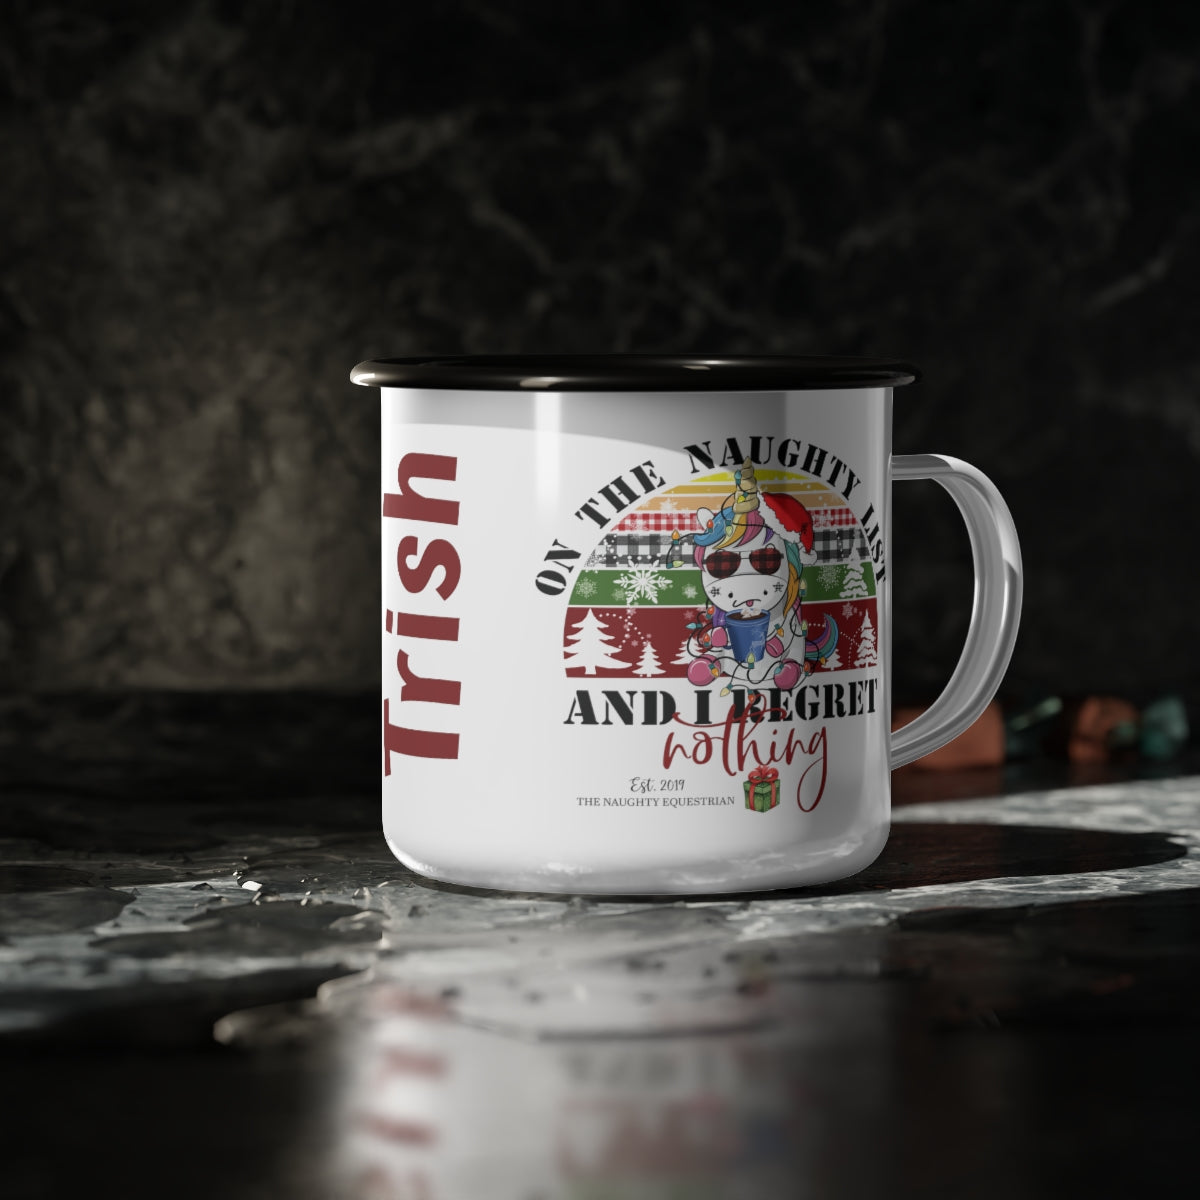 Personalized On the Naughty List Enamel Horse Coffee Cup - The Naughty Equestrian